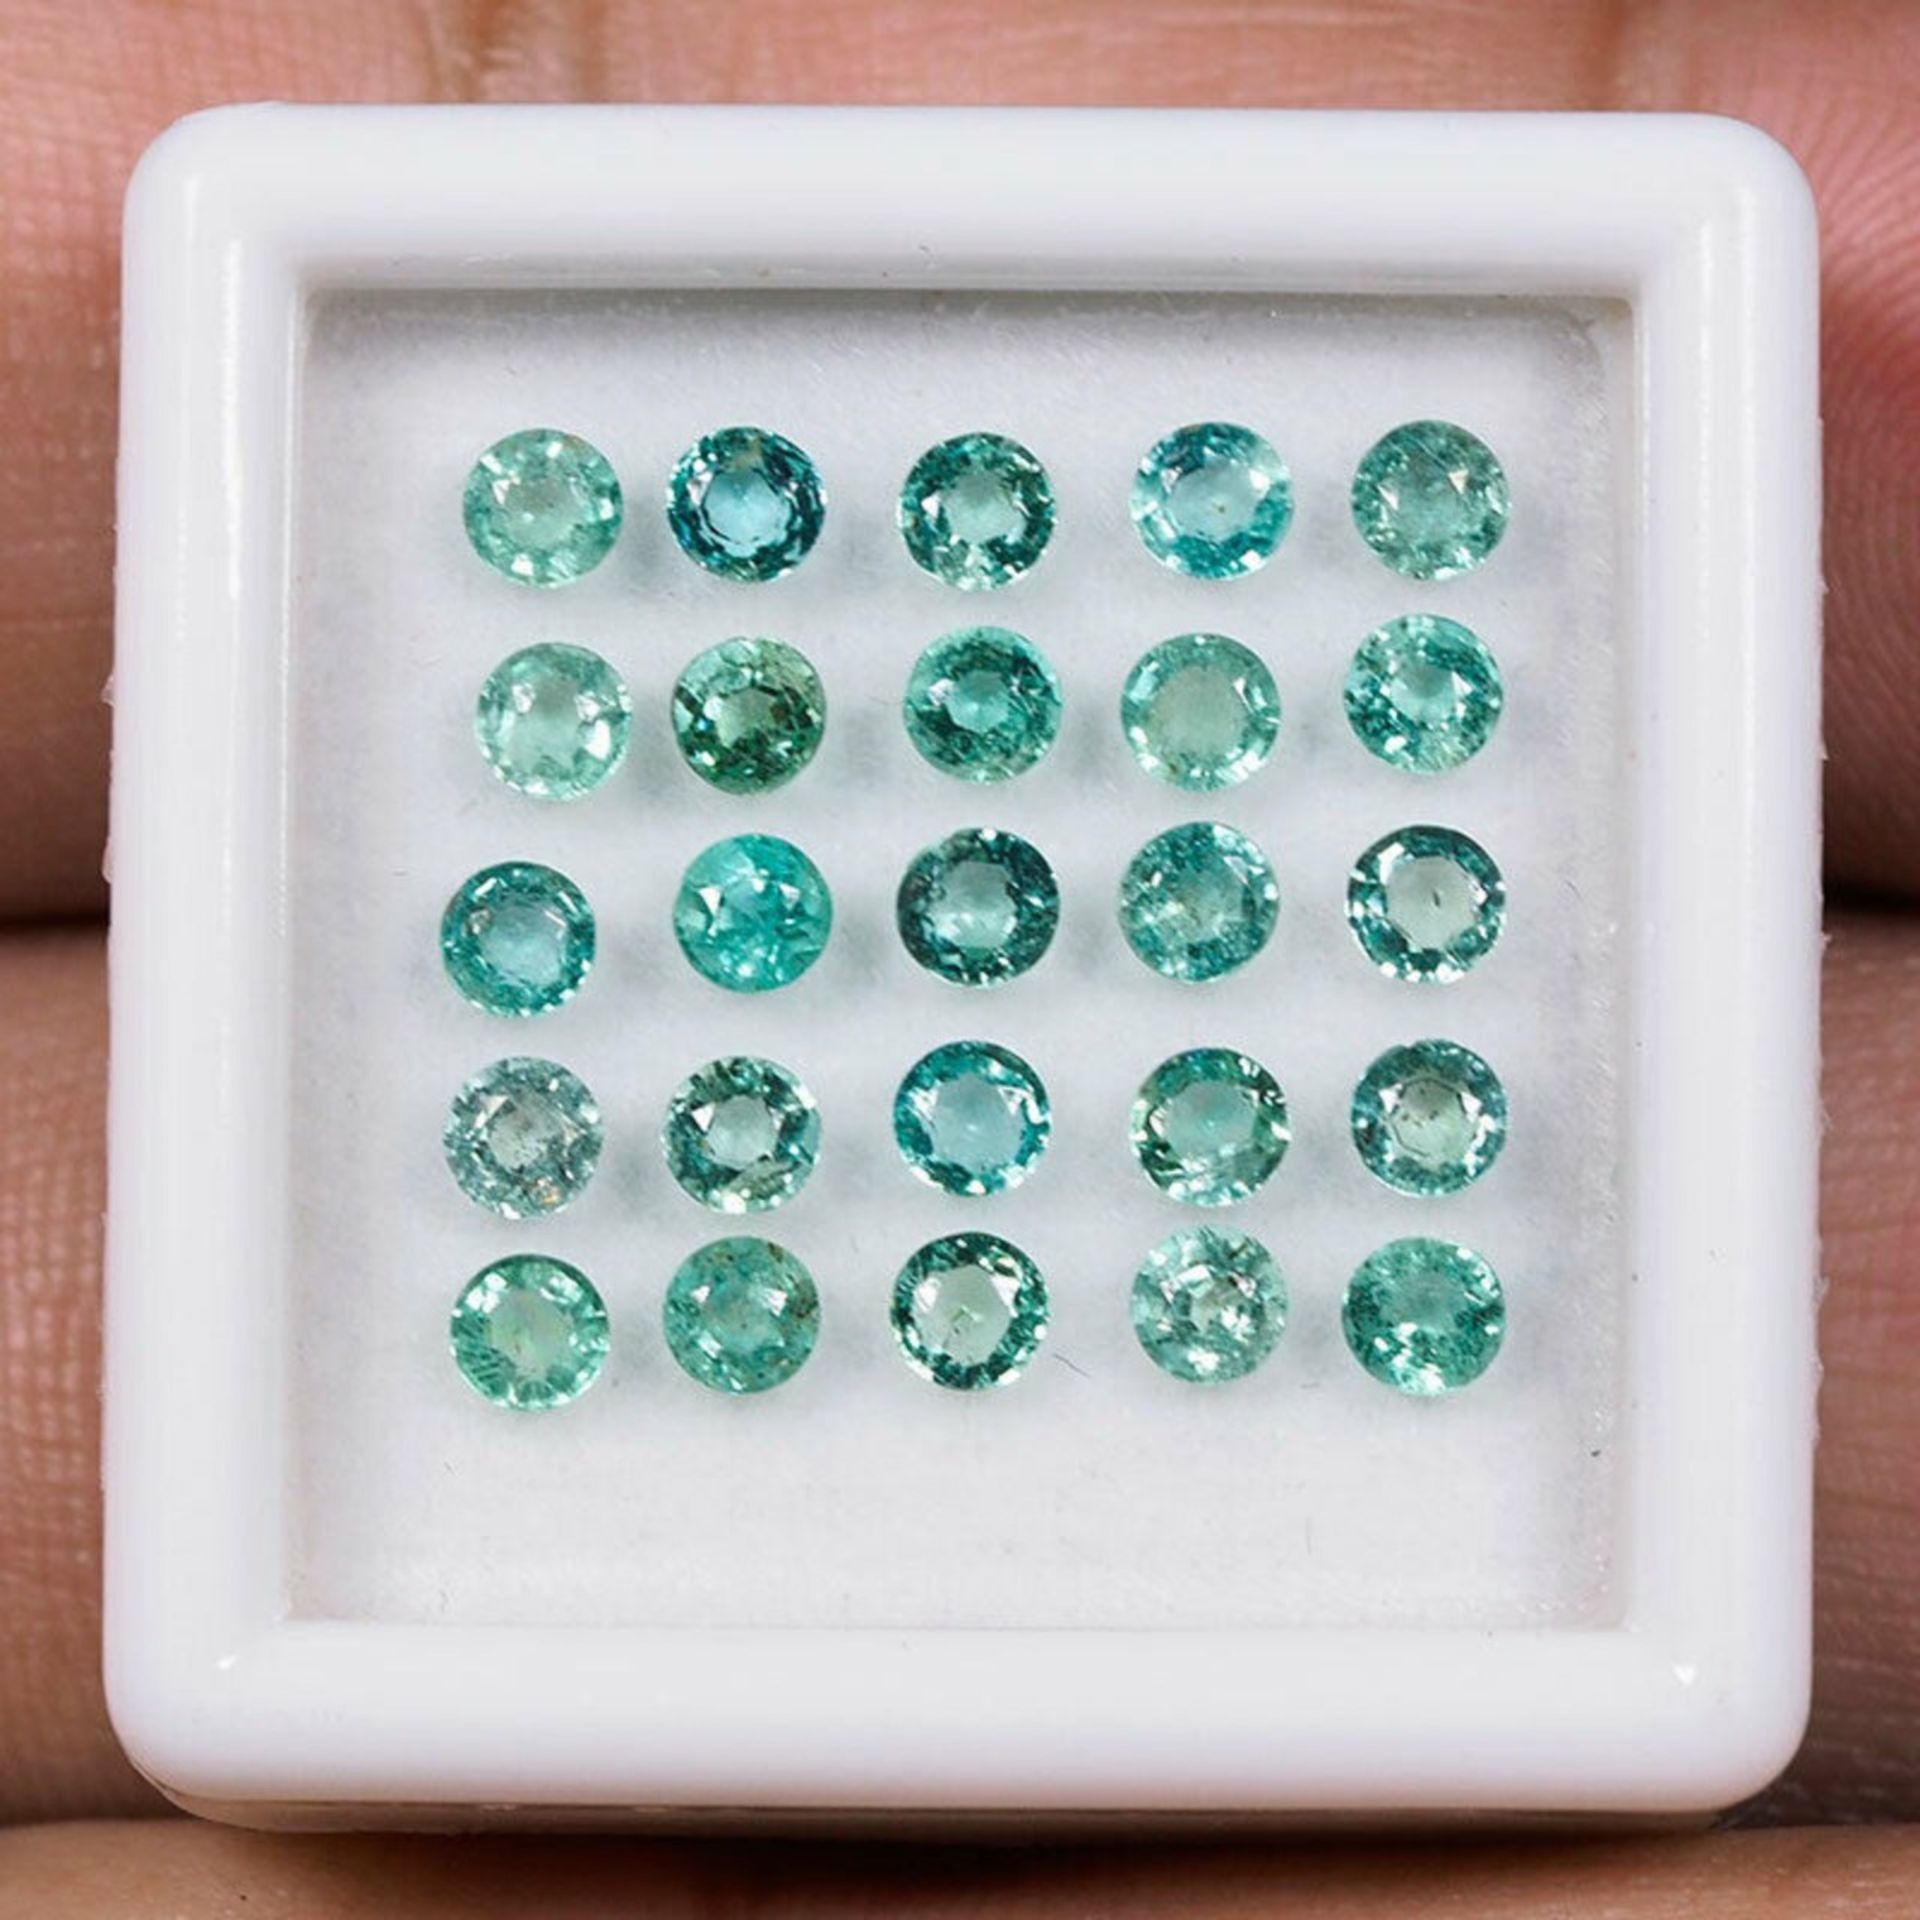 IGL&I Certified - Natural Colombian Emeralds - 1.89 Carats - 20 Pieces - Diamond round cut - Average